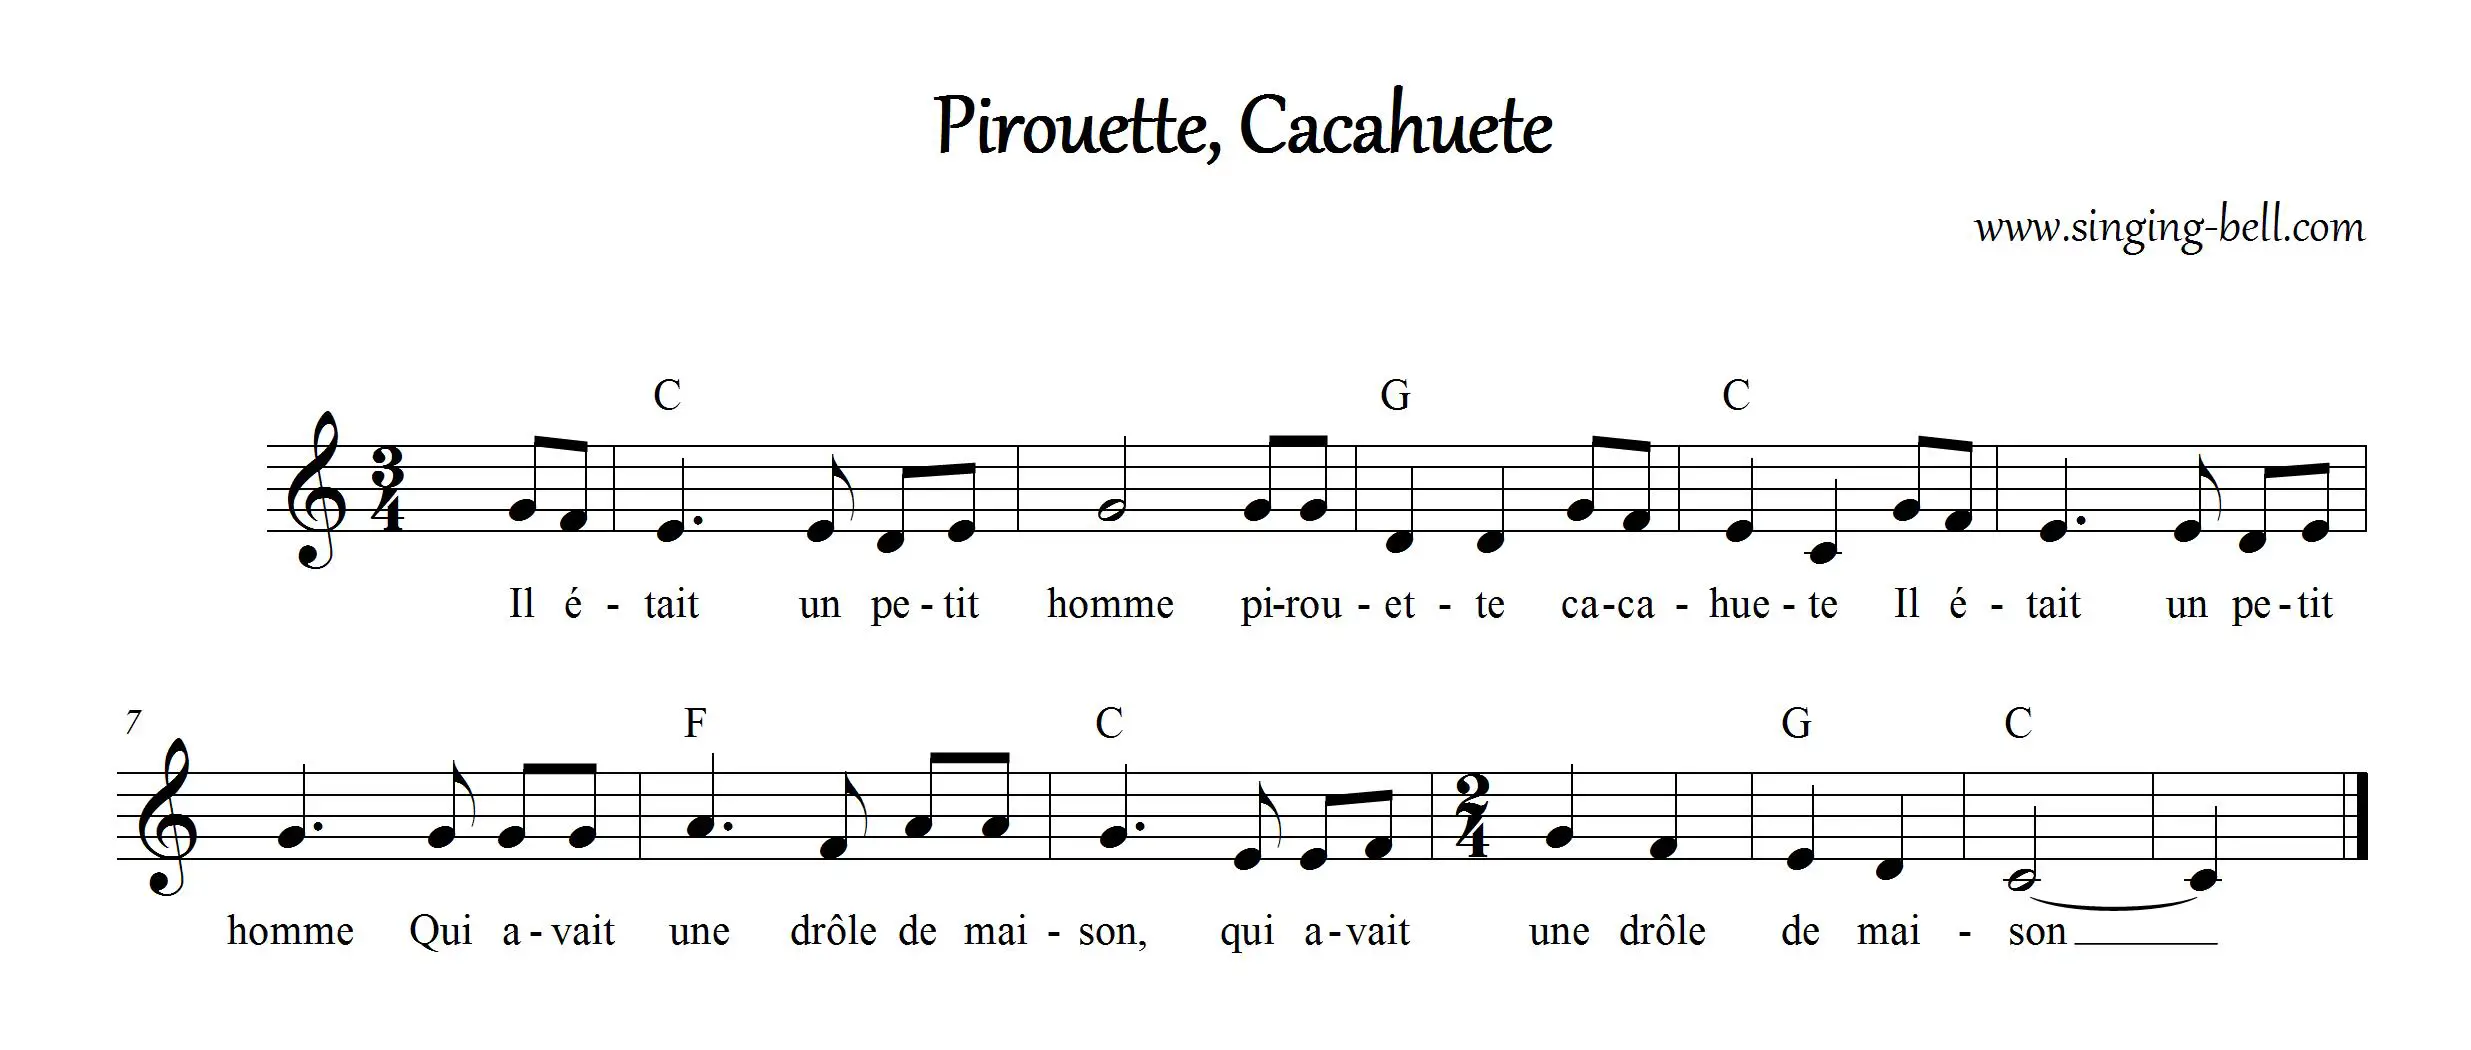 Pirouette Cacahuete Singing-Bell